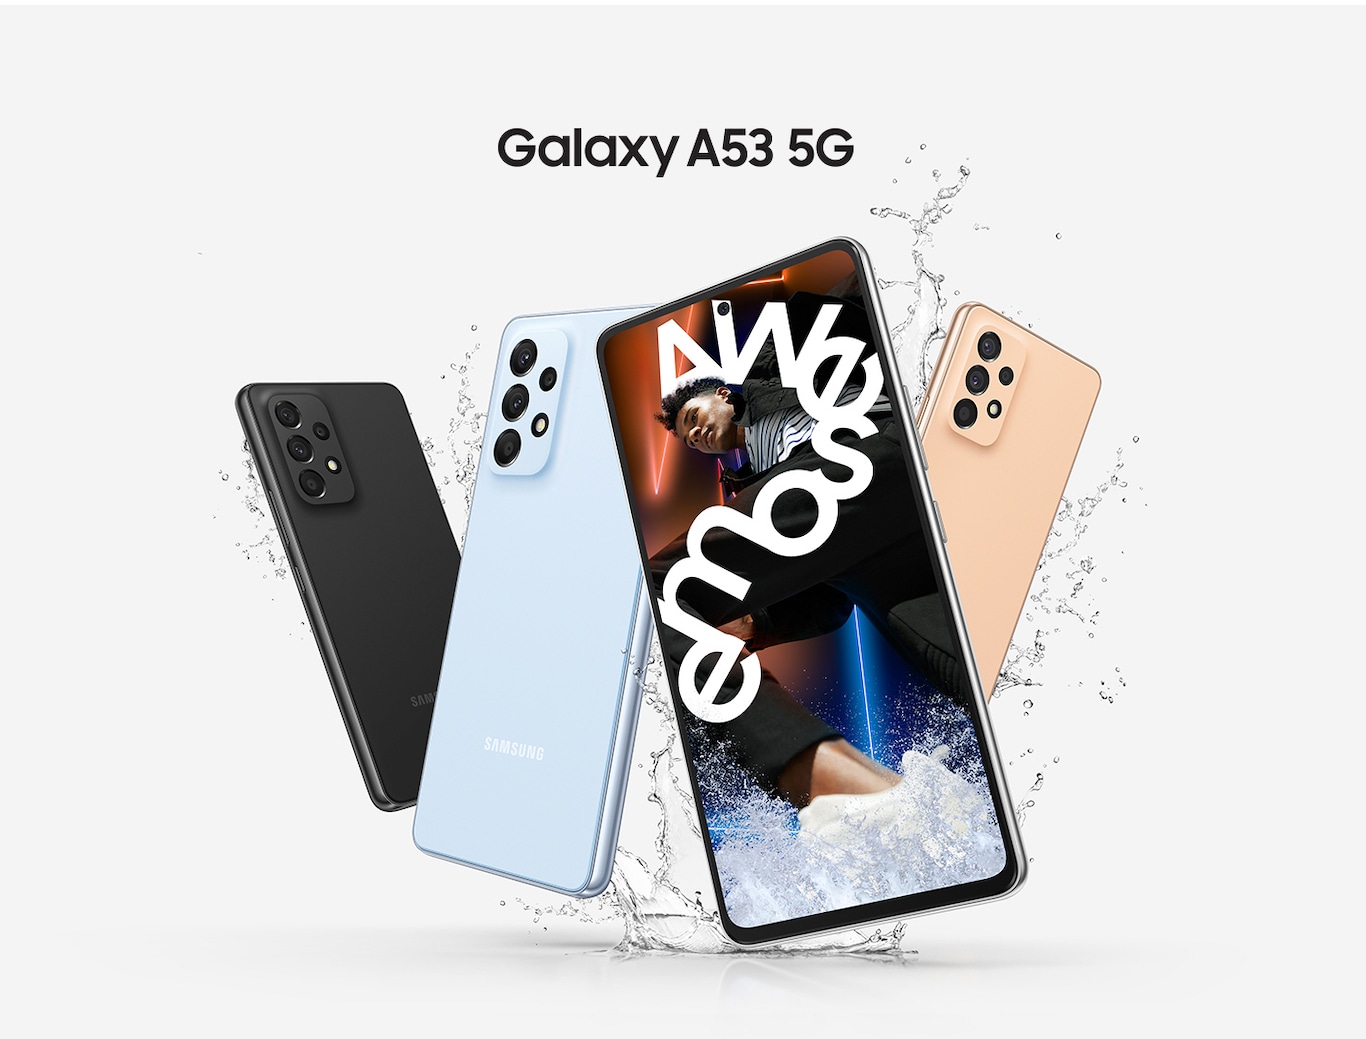 See Samsung A53 release dates and specs. And compare Samsung Galaxy A53 with the other models here. The smartphone with a 64MP OIS camera and a 5,000mAh battery. Four Samsung Galaxy A53 5G devices in Awesome Black, Awesome Blue and Awesome Peach